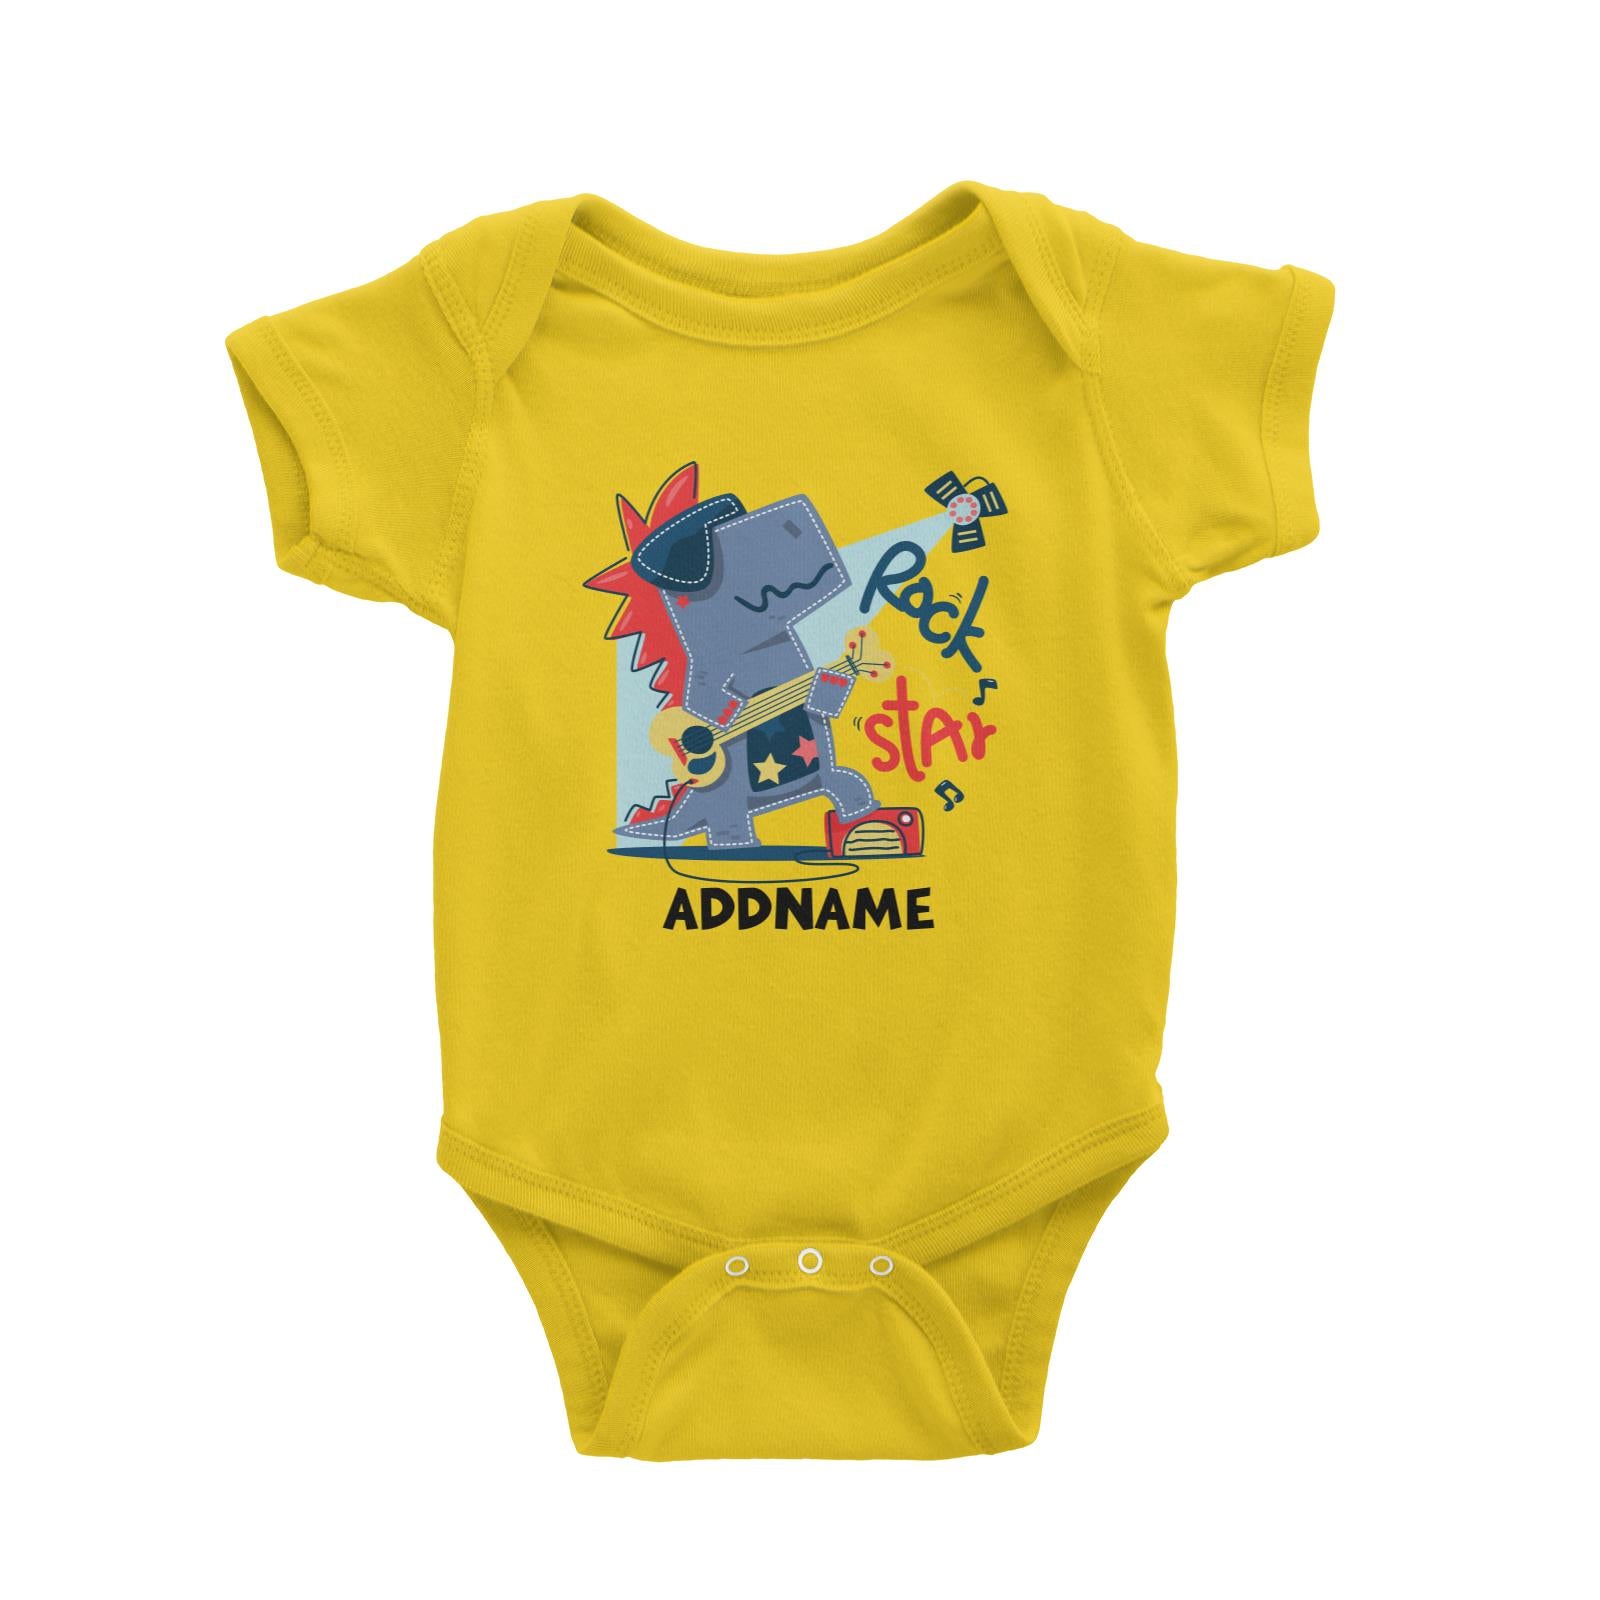 Rock Star Dinosaur with Guitar Addname Baby Romper